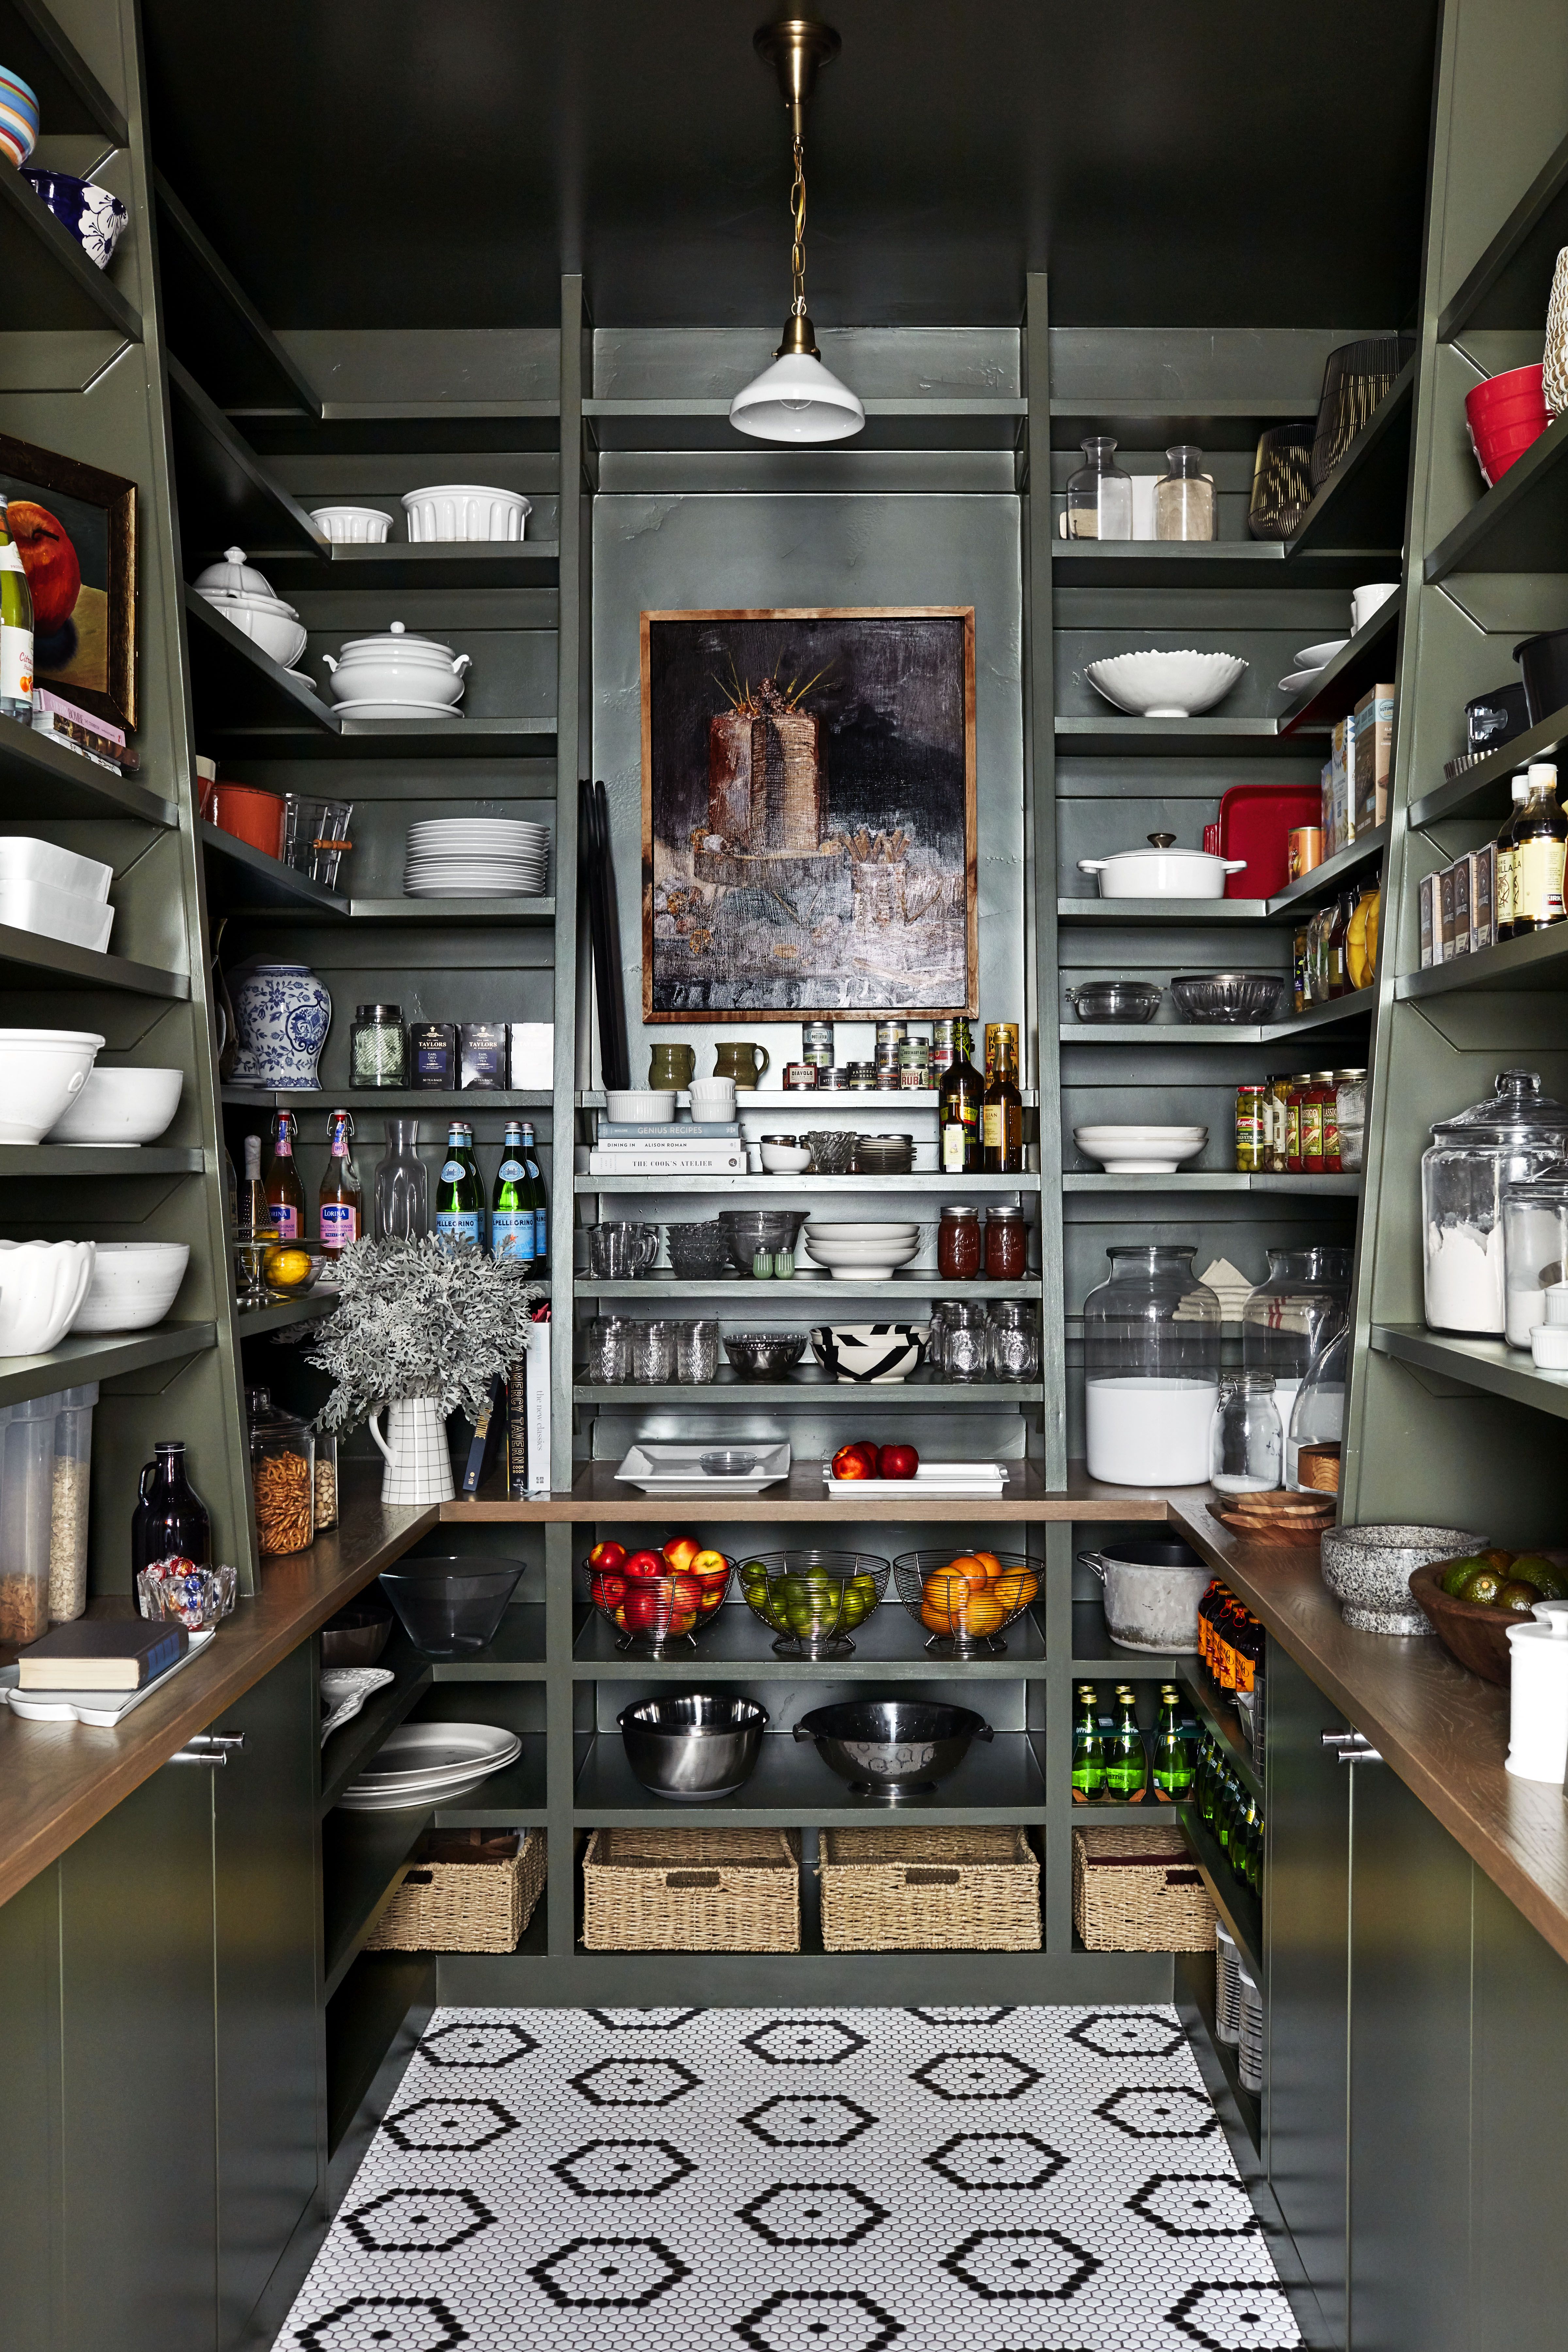 Pantry Cleaning Checklist How To, What Material To Use For Pantry Shelves